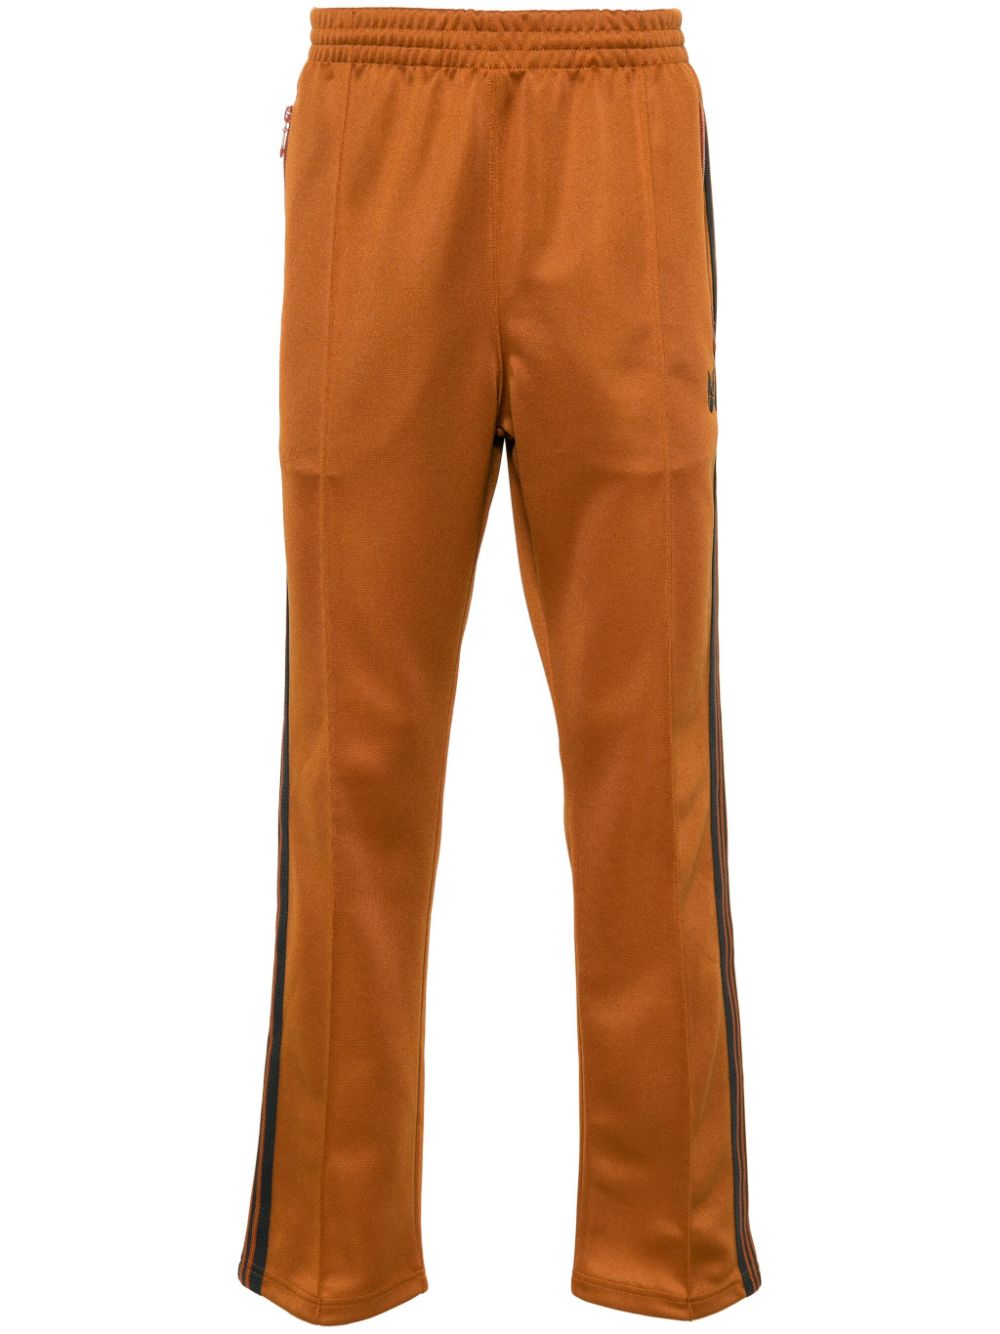 Needles Poly Smooth side-stripe track pants - Brown von Needles